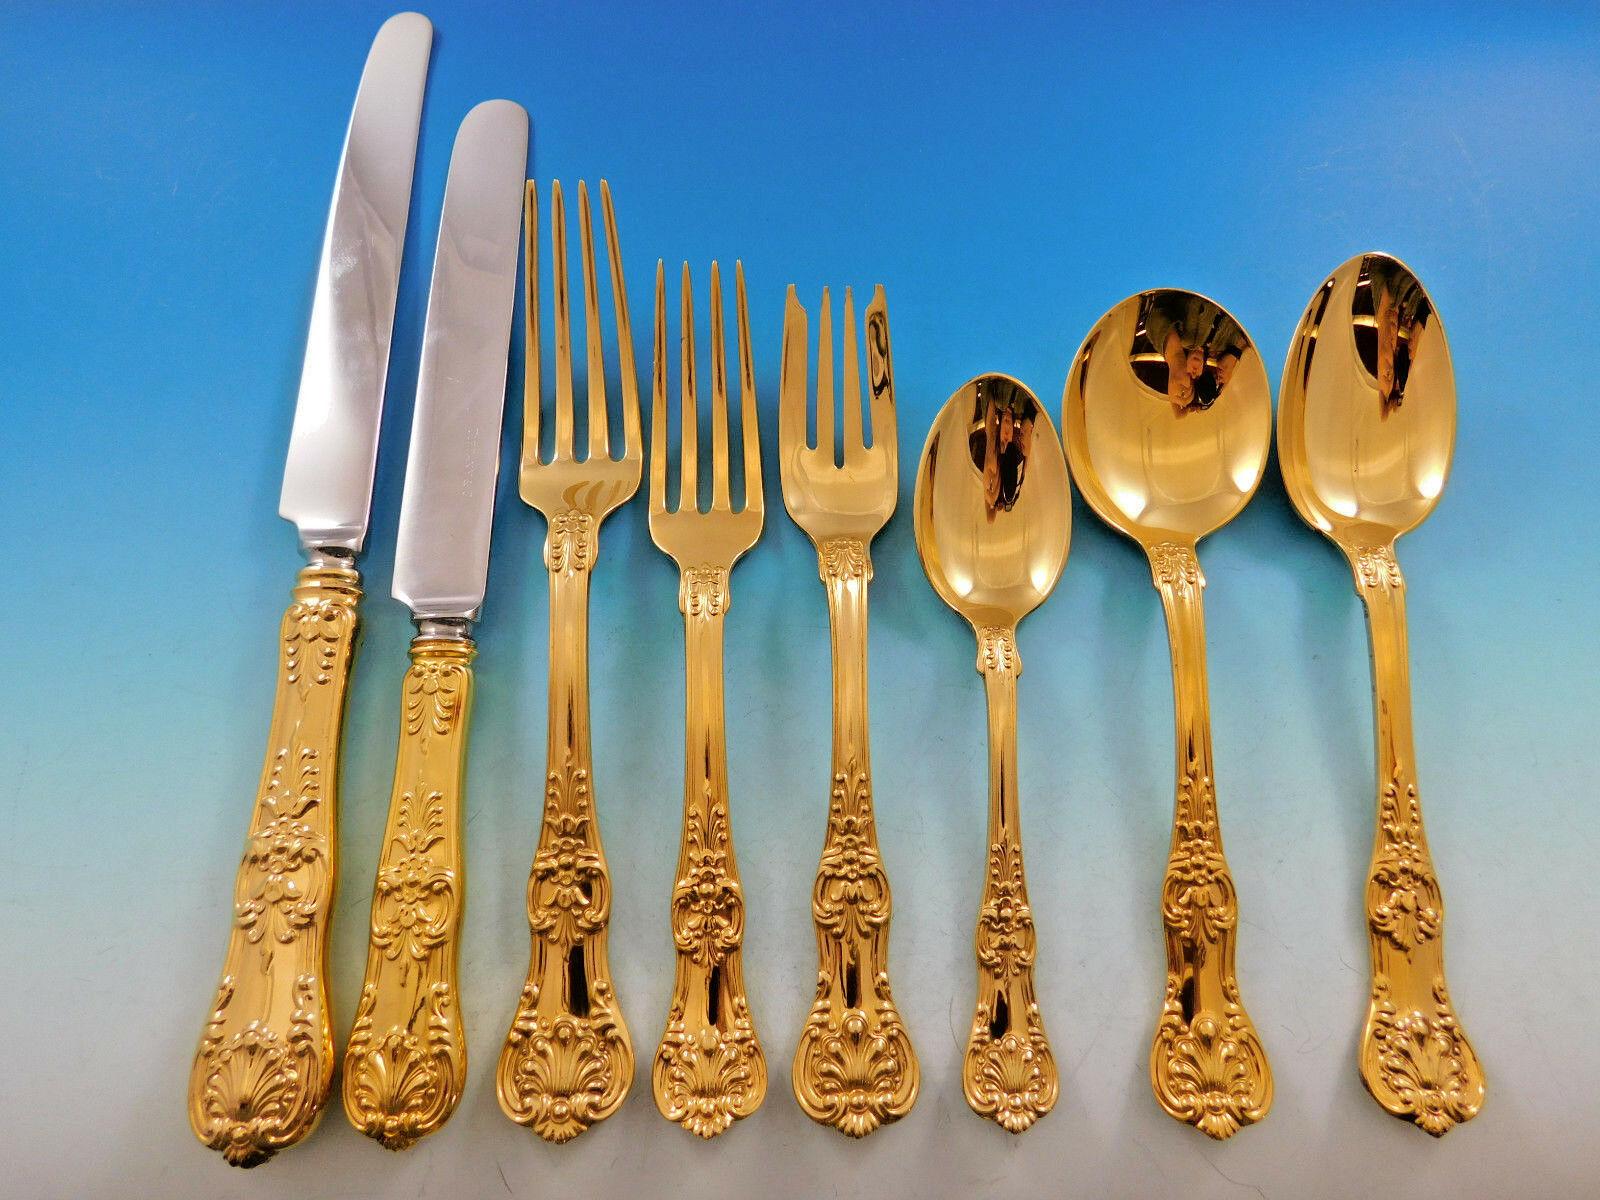 Outstanding English King Vermeil (completely gilded in 24k gold over sterling) by Tiffany sterling silver Flatware set, 64 pieces. This set includes:

8 dinner size knives, 10 1/4